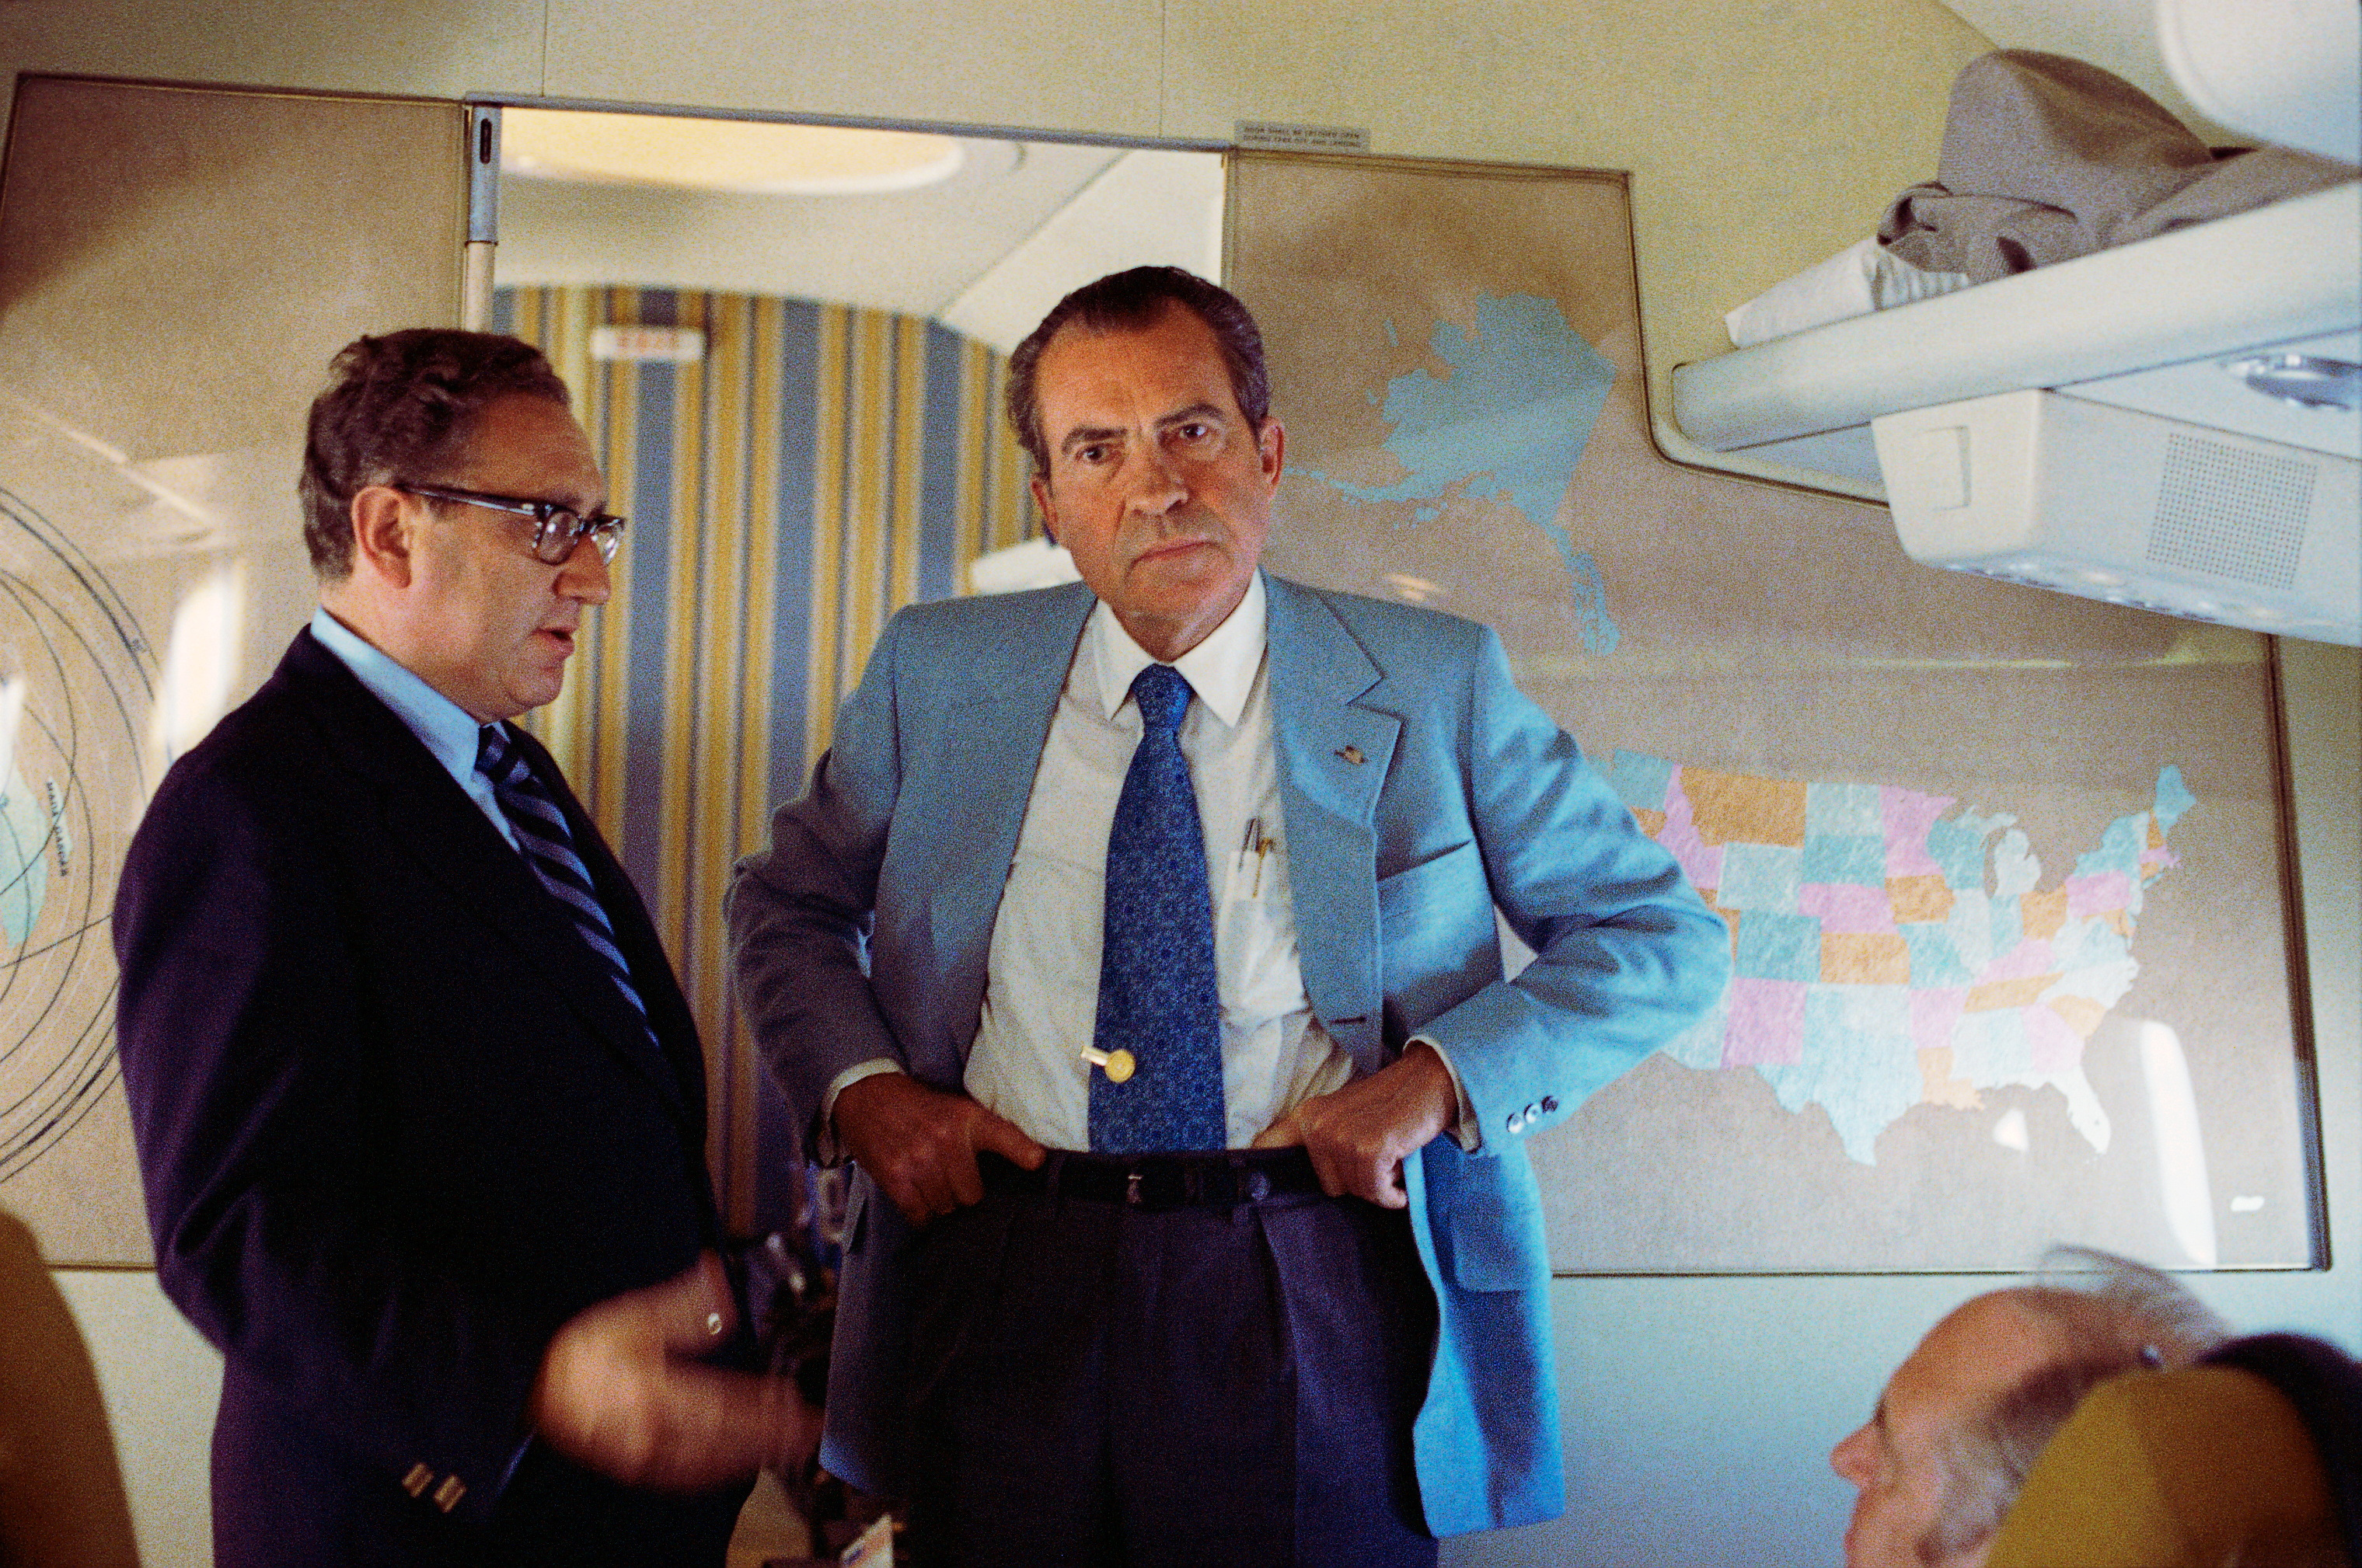 U.S. President Richard Nixon and National Security Adviser Henry Kissinger stand on Air Force One during their voyage to China February 20, 1972. via Richard Nixon Presidential Library 